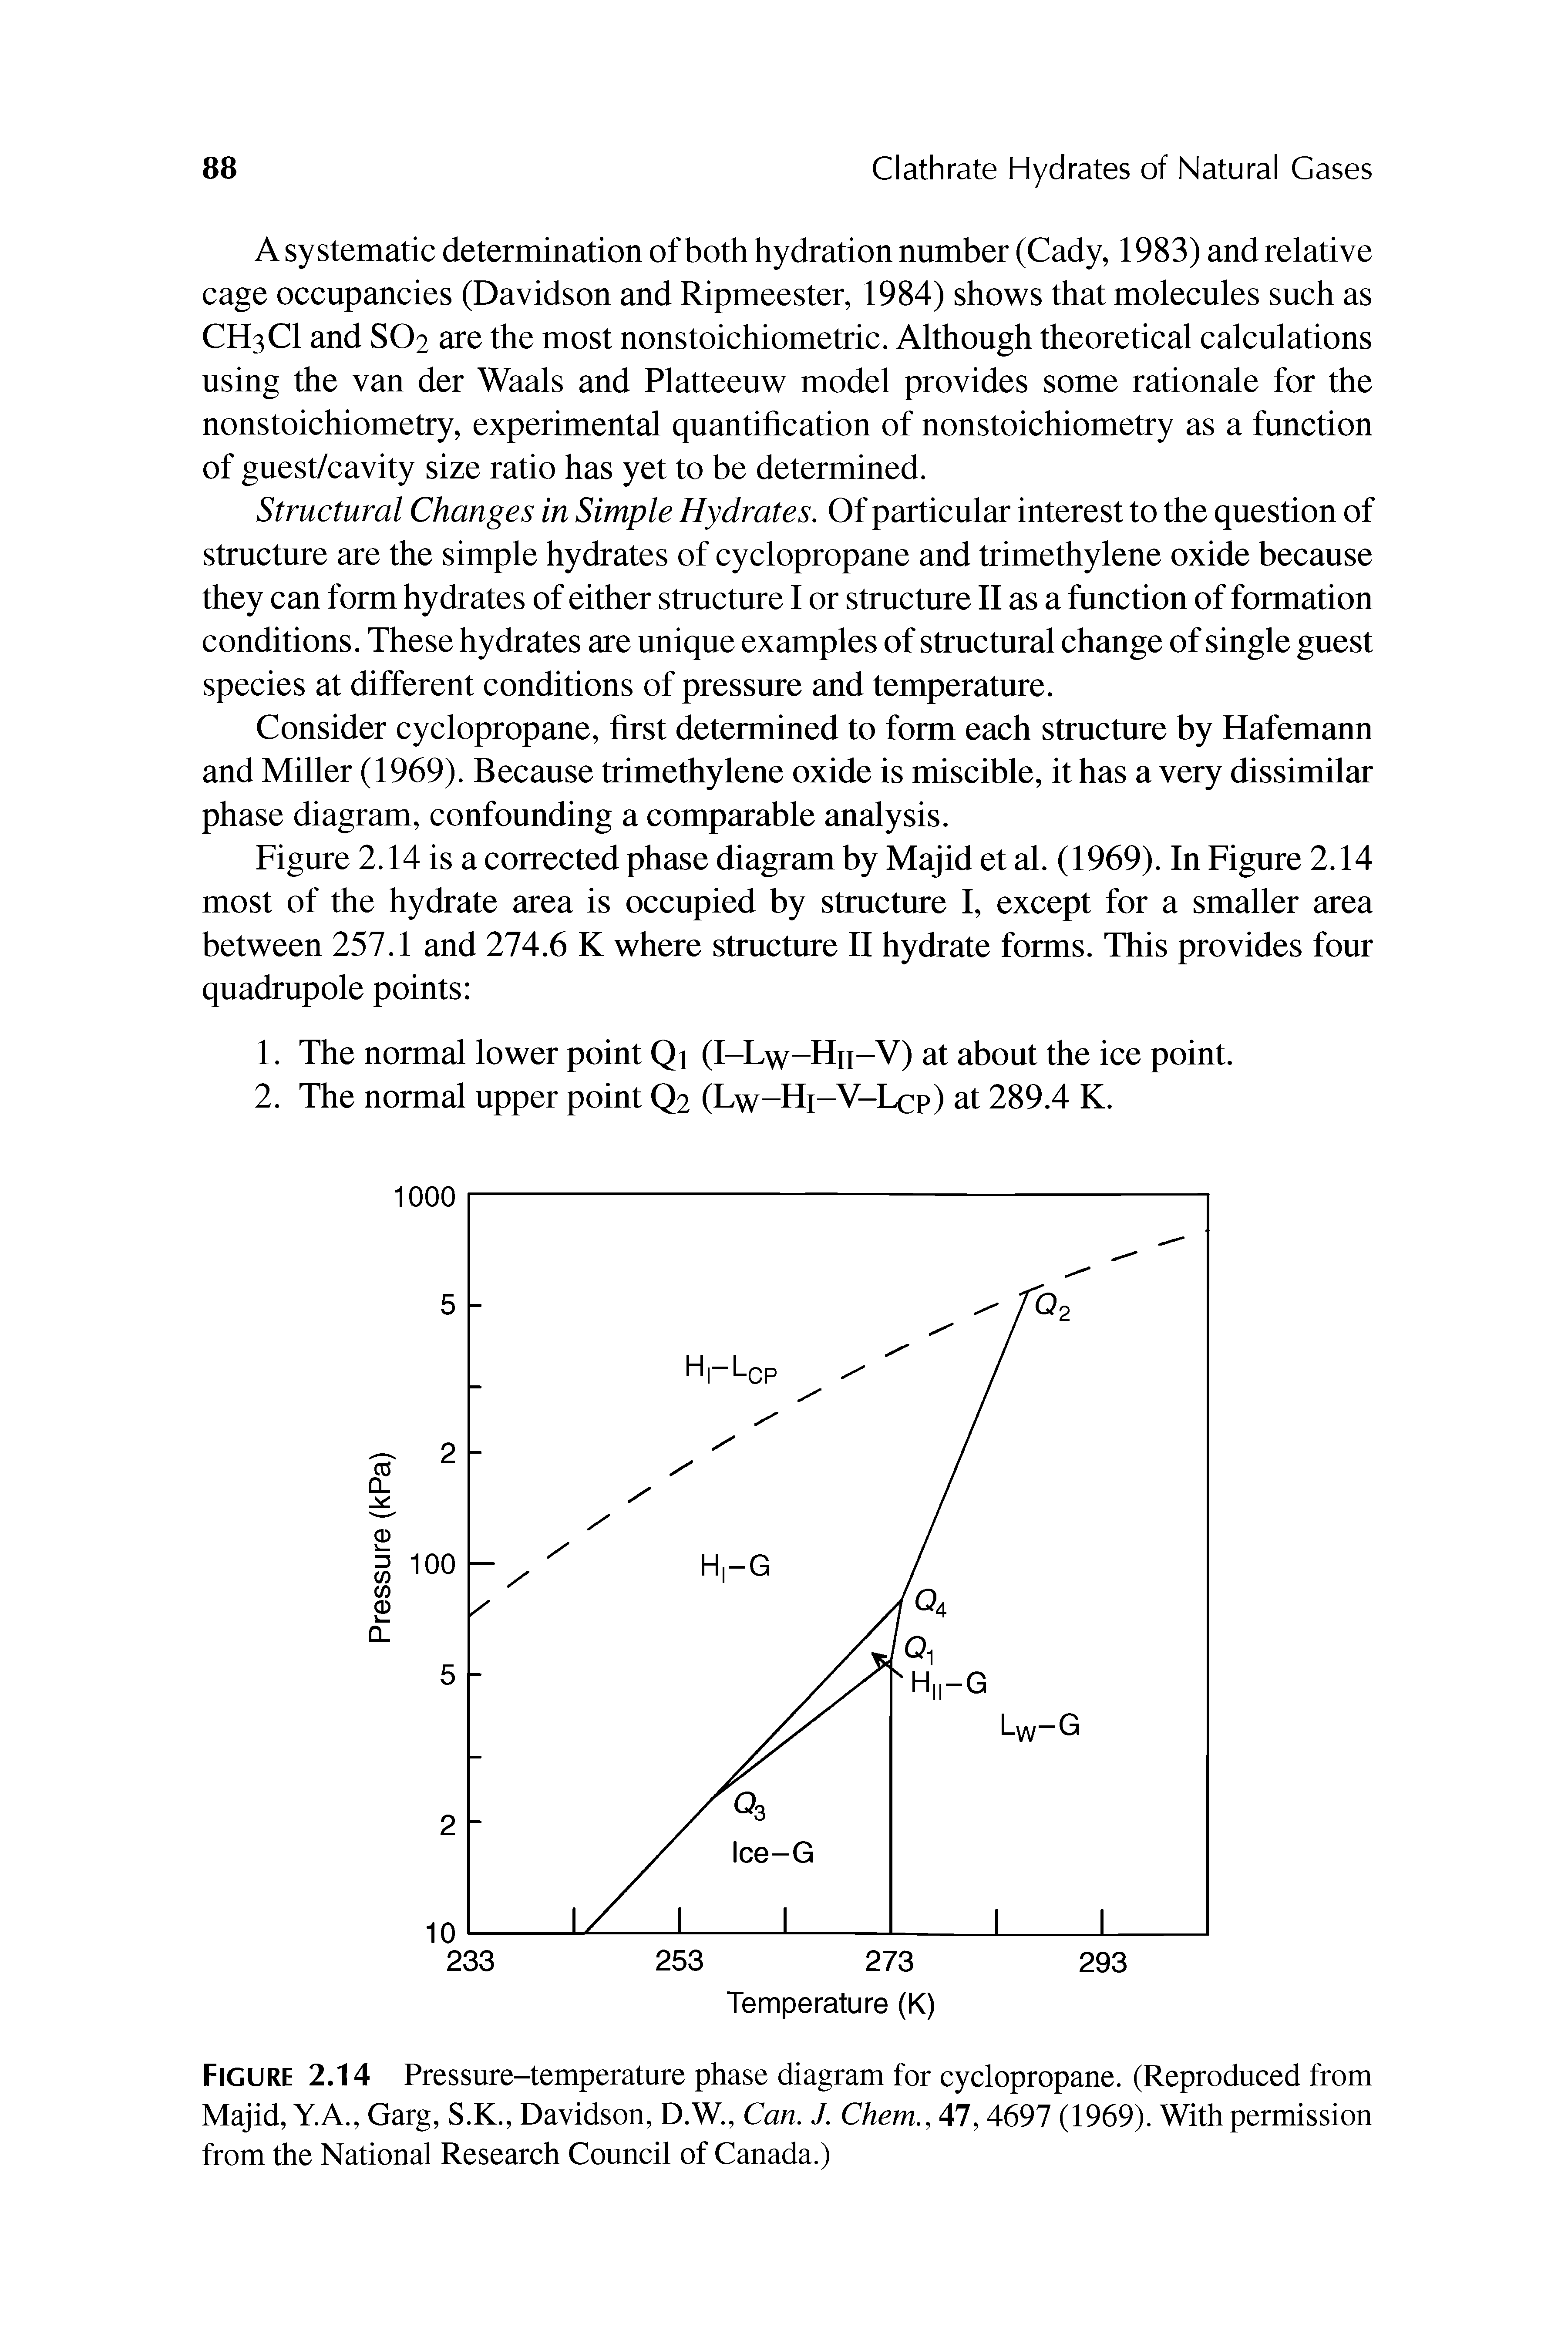 Figure 2.14 Pressure-temperature phase diagram for cyclopropane. (Reproduced from Majid, Y.A., Garg, S.K., Davidson, D.W., Can. J. Chem., 47,4697 (1969). With permission from the National Research Council of Canada.)...